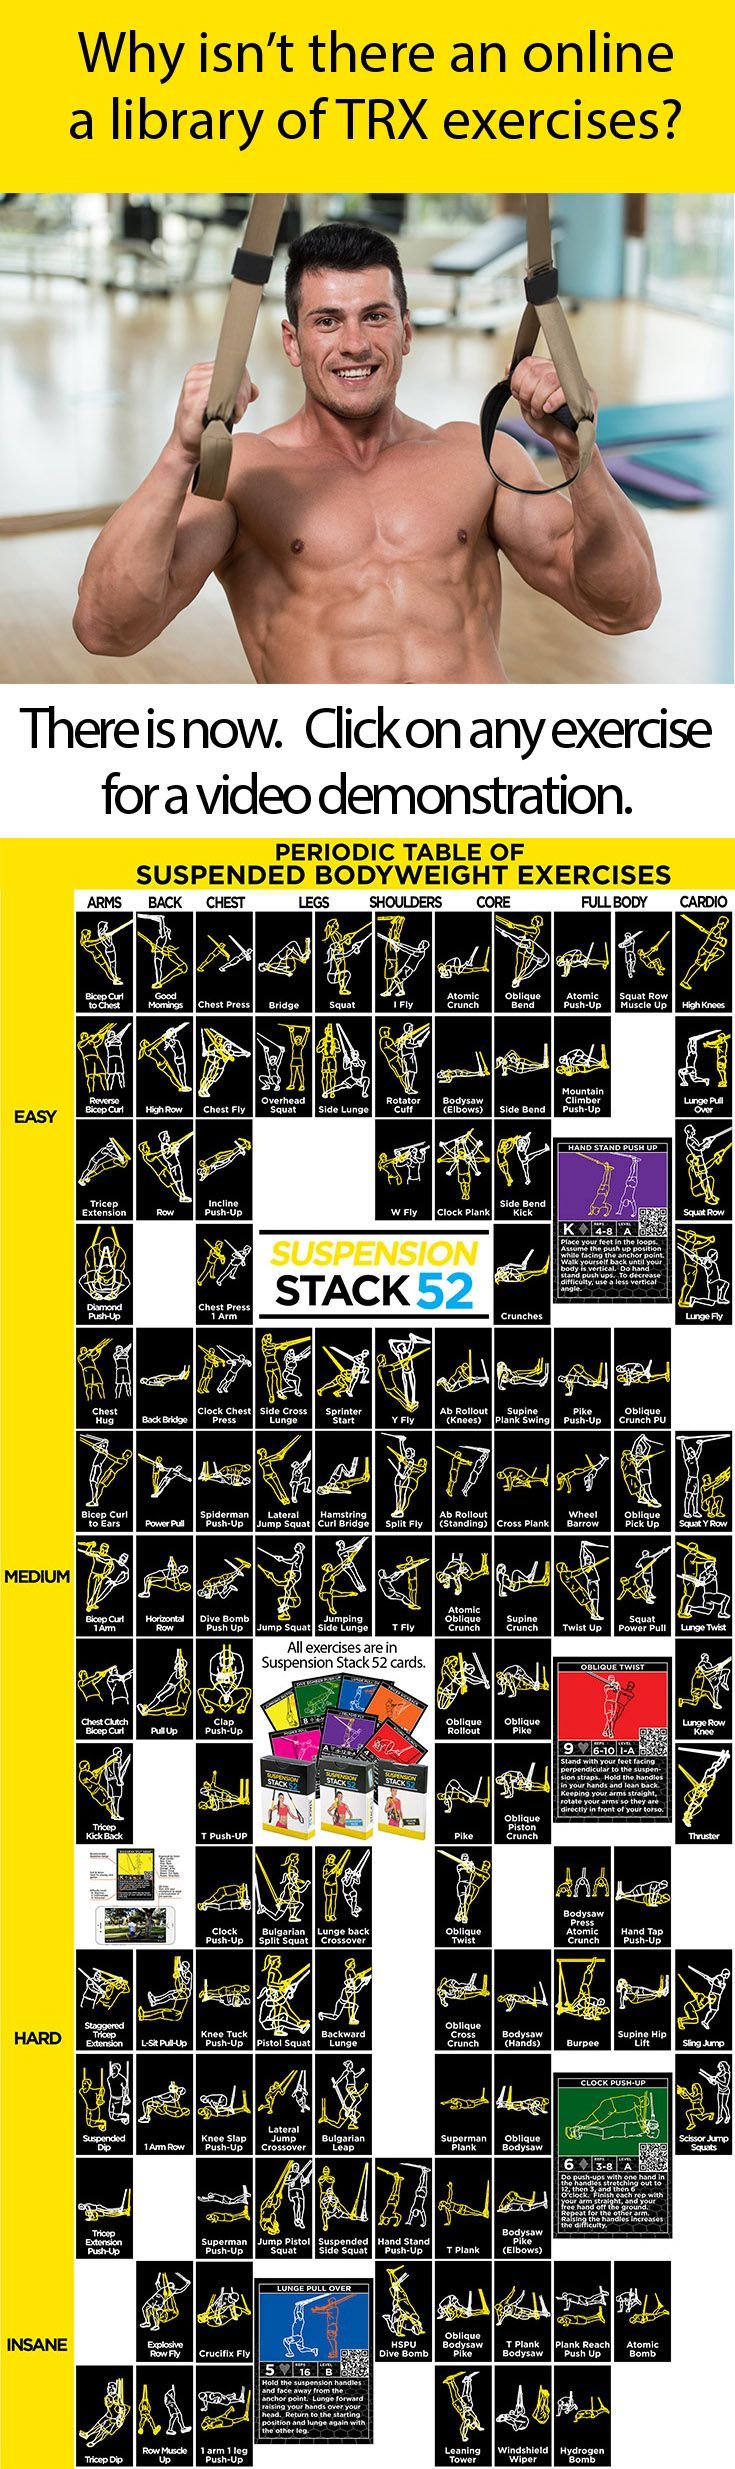 This Periodic Table of Suspension Exercises lists 119 TRX exercises arranged by muscle group and difficult